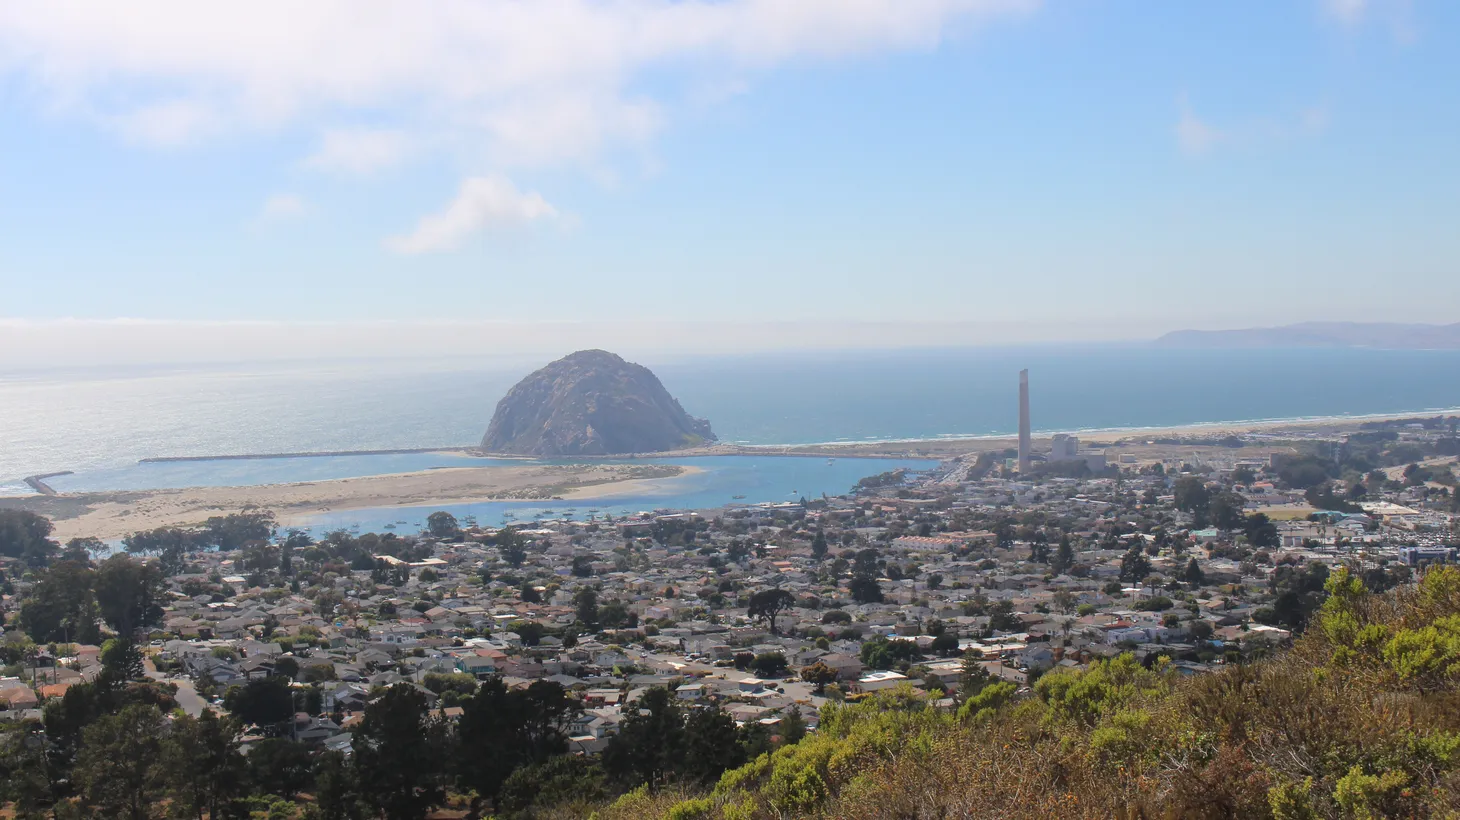 A view of the Morro Bay harbor from Black Hill. The wind farm will be located northwest of the city and impact local fishermen.